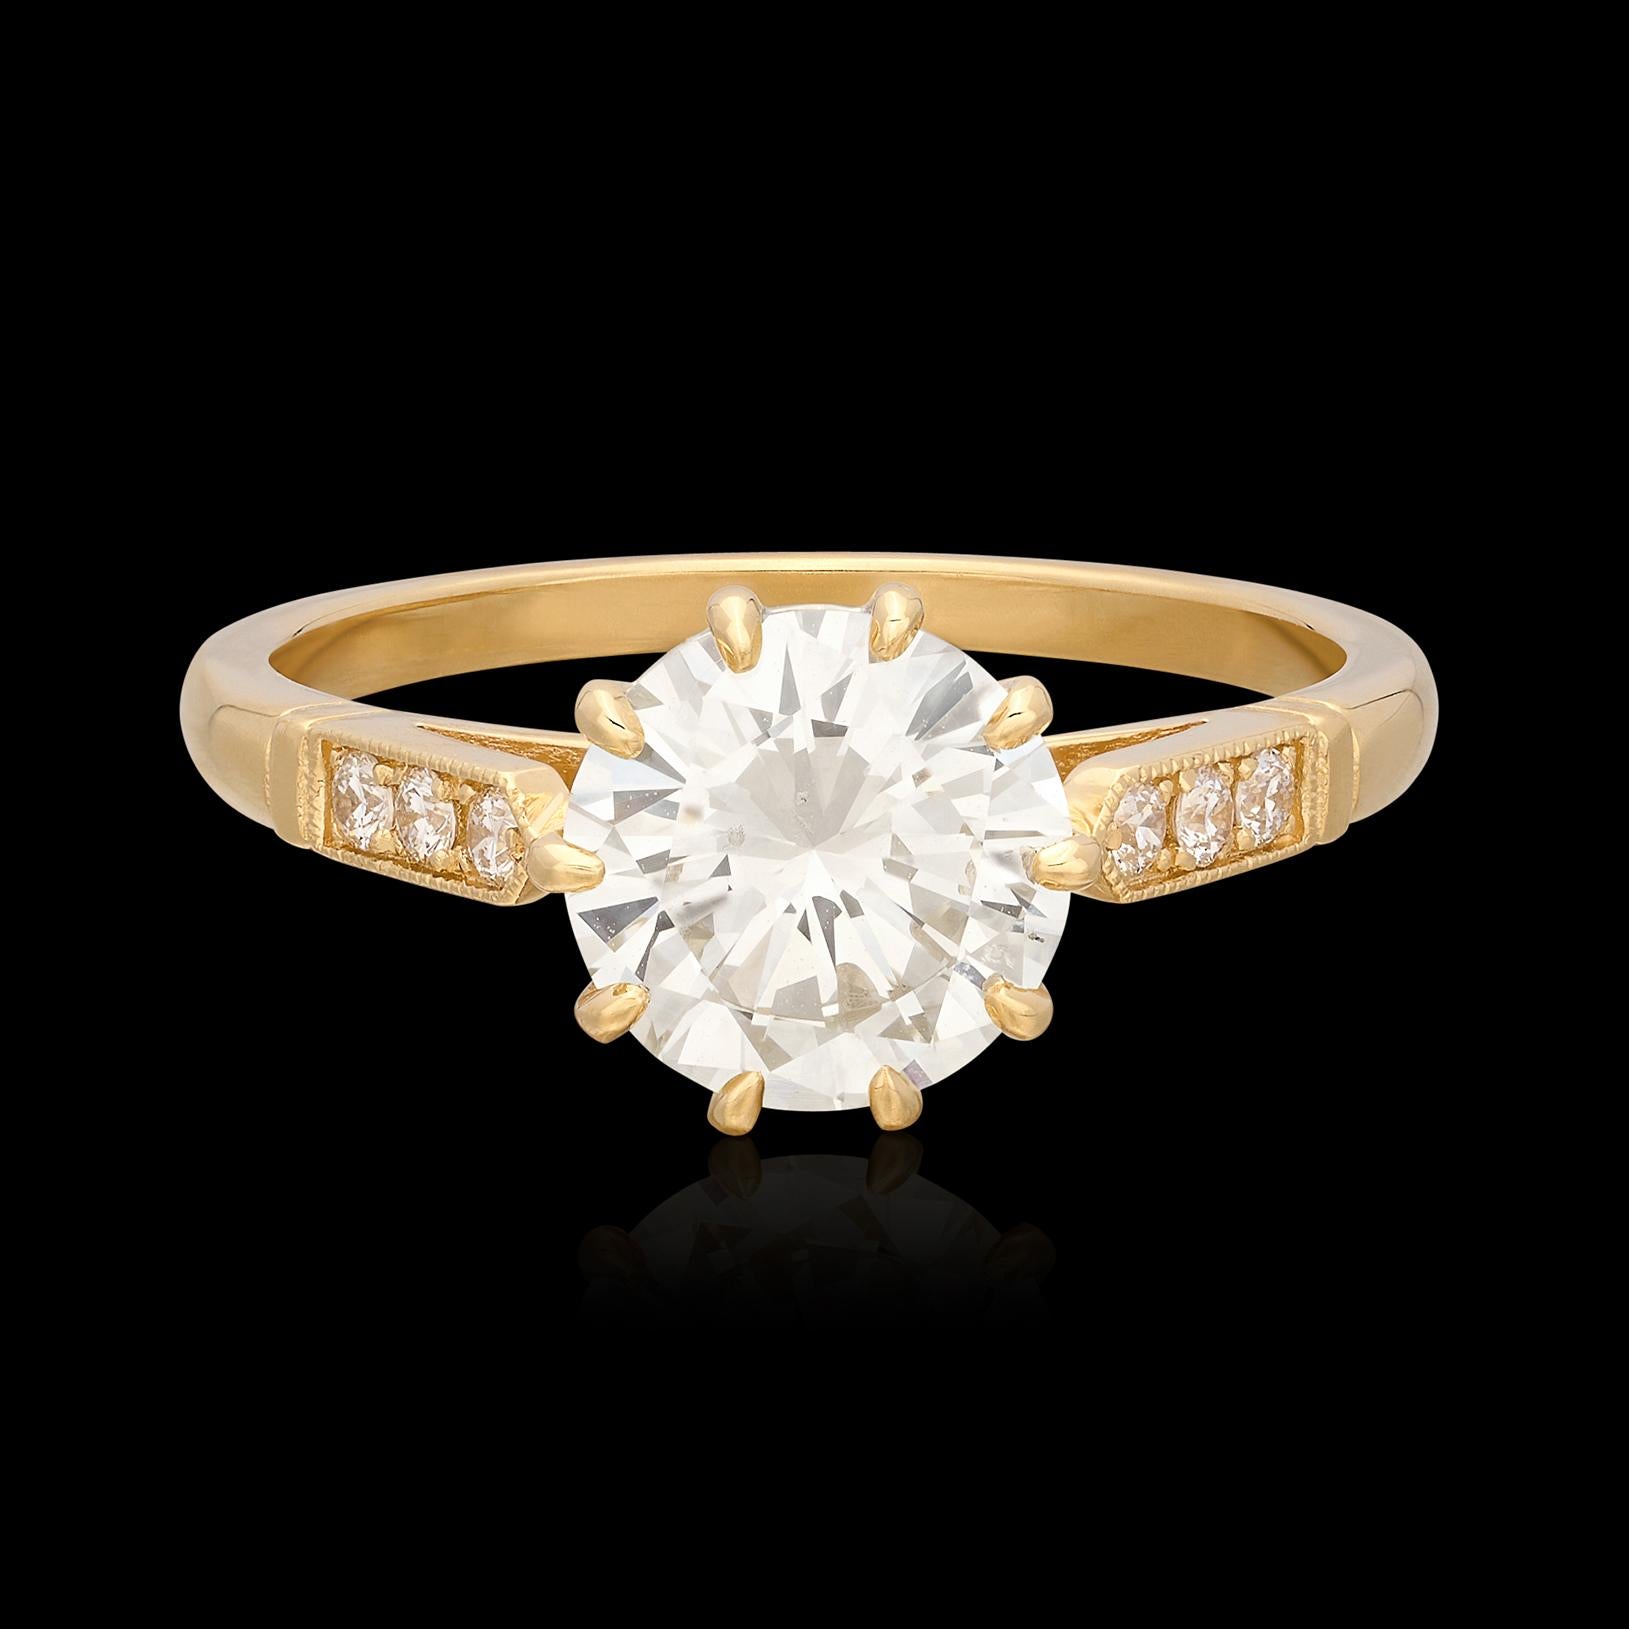 A timeless design with a modern twist and superior sparkle. The 18k yellow gold ring features a 1.66 carat round brilliant-cut diamond (graded K-L/VS), set in 10 prongs for a unique look. The shoulders are set with six additional diamonds for a